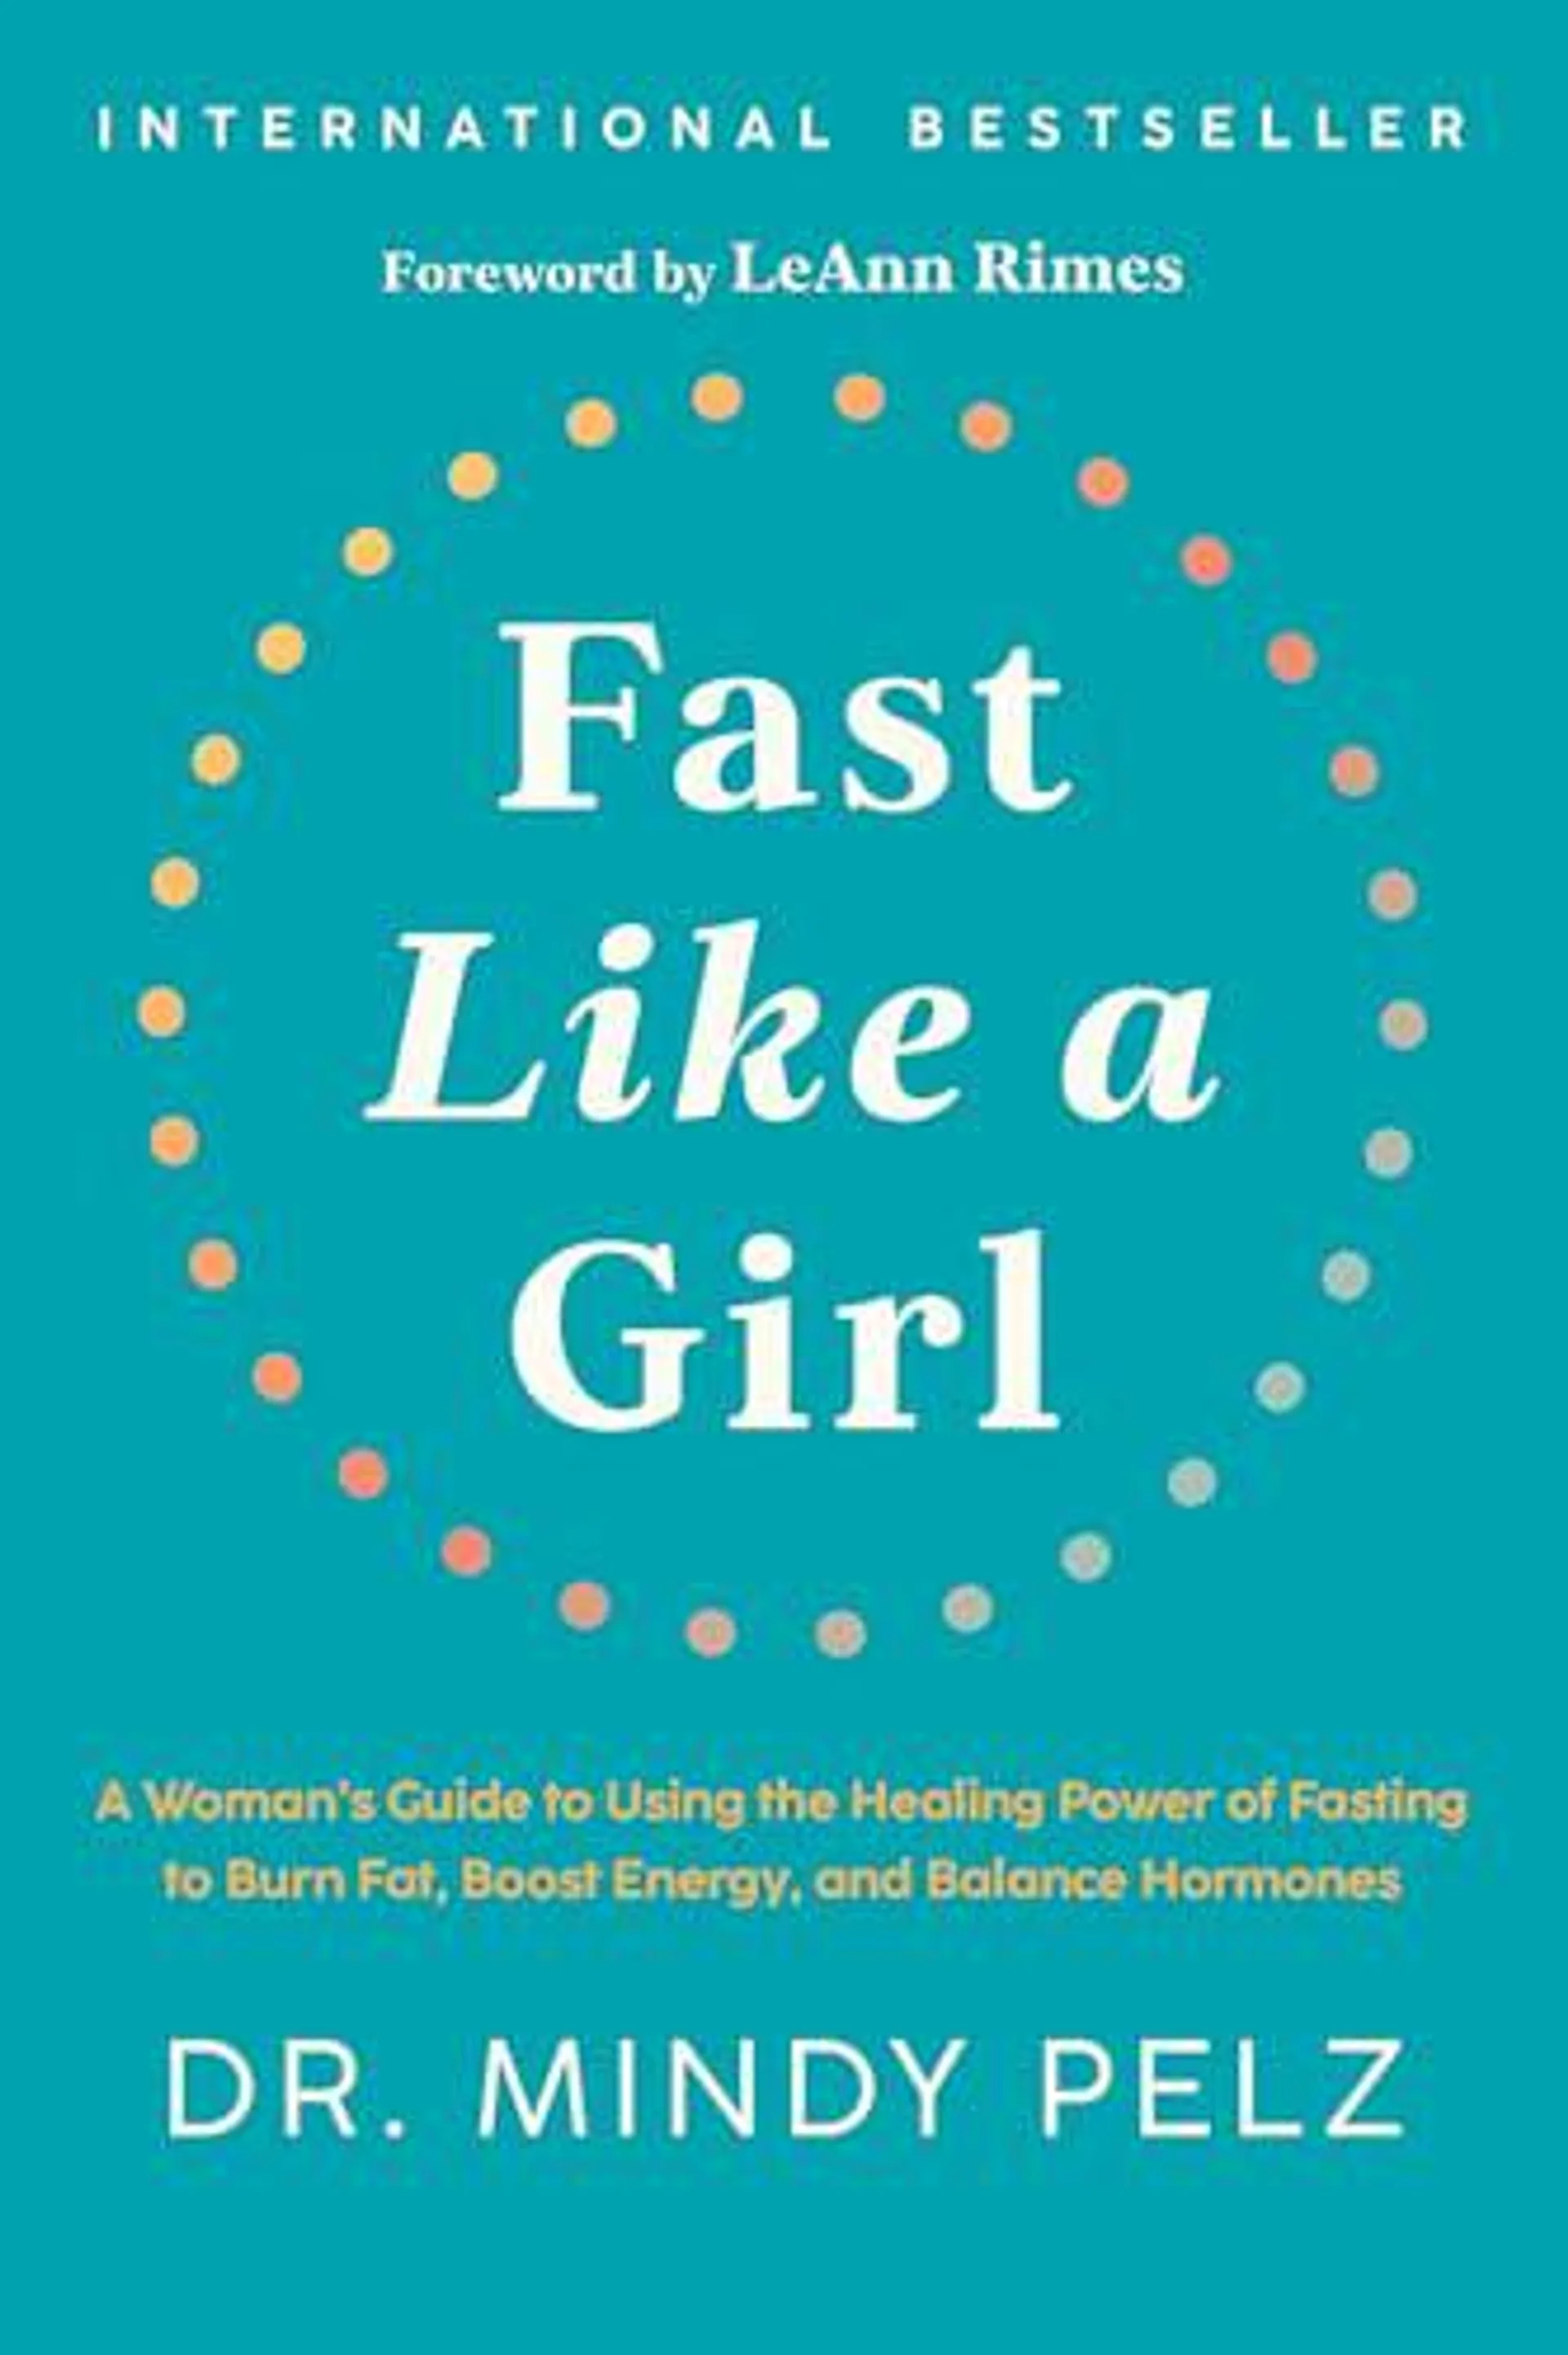 Fast Like a Girl by Dr. Mindy Pelz